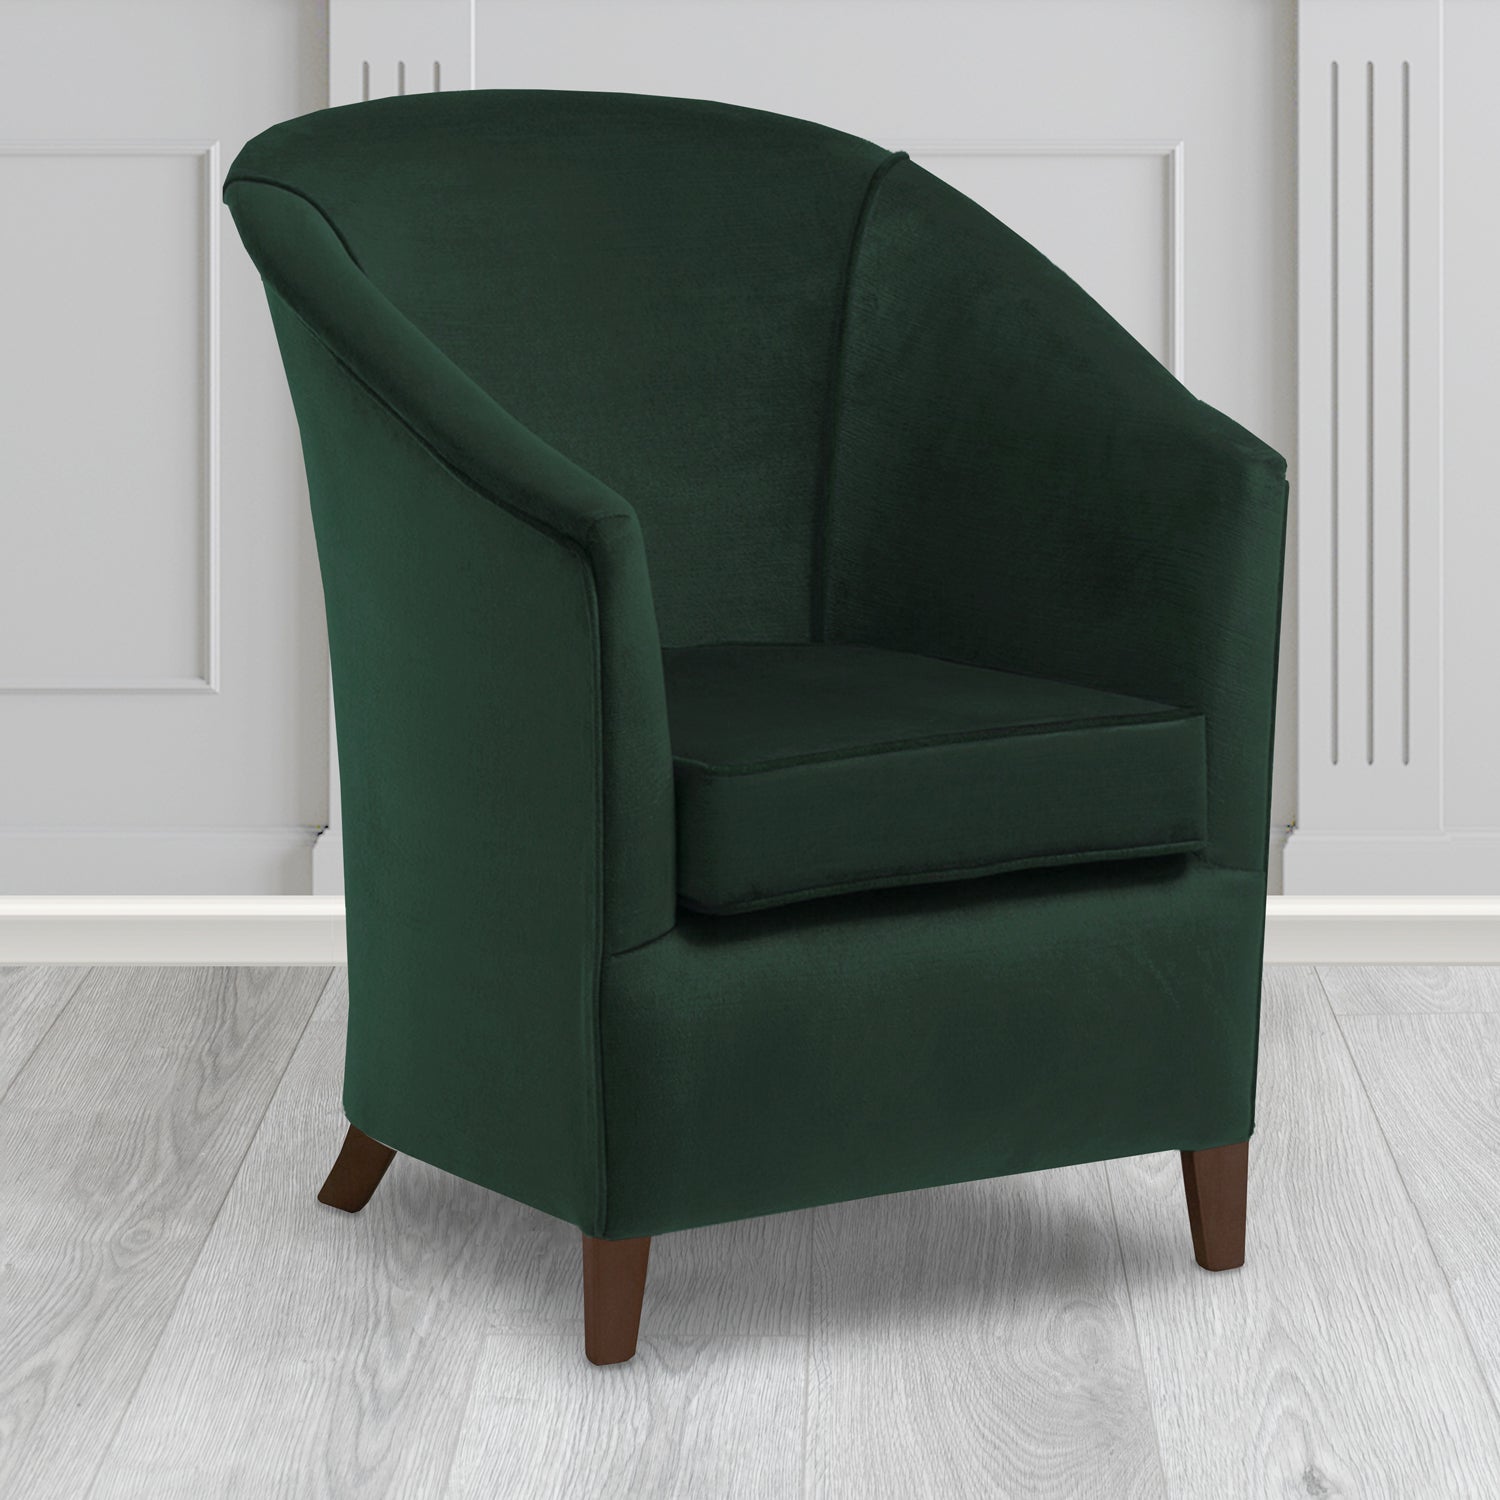 Bolton Tub Chair in Noble 228 Bottle Green Crib 5 Velvet Fabric - Water Resistant - The Tub Chair Shop